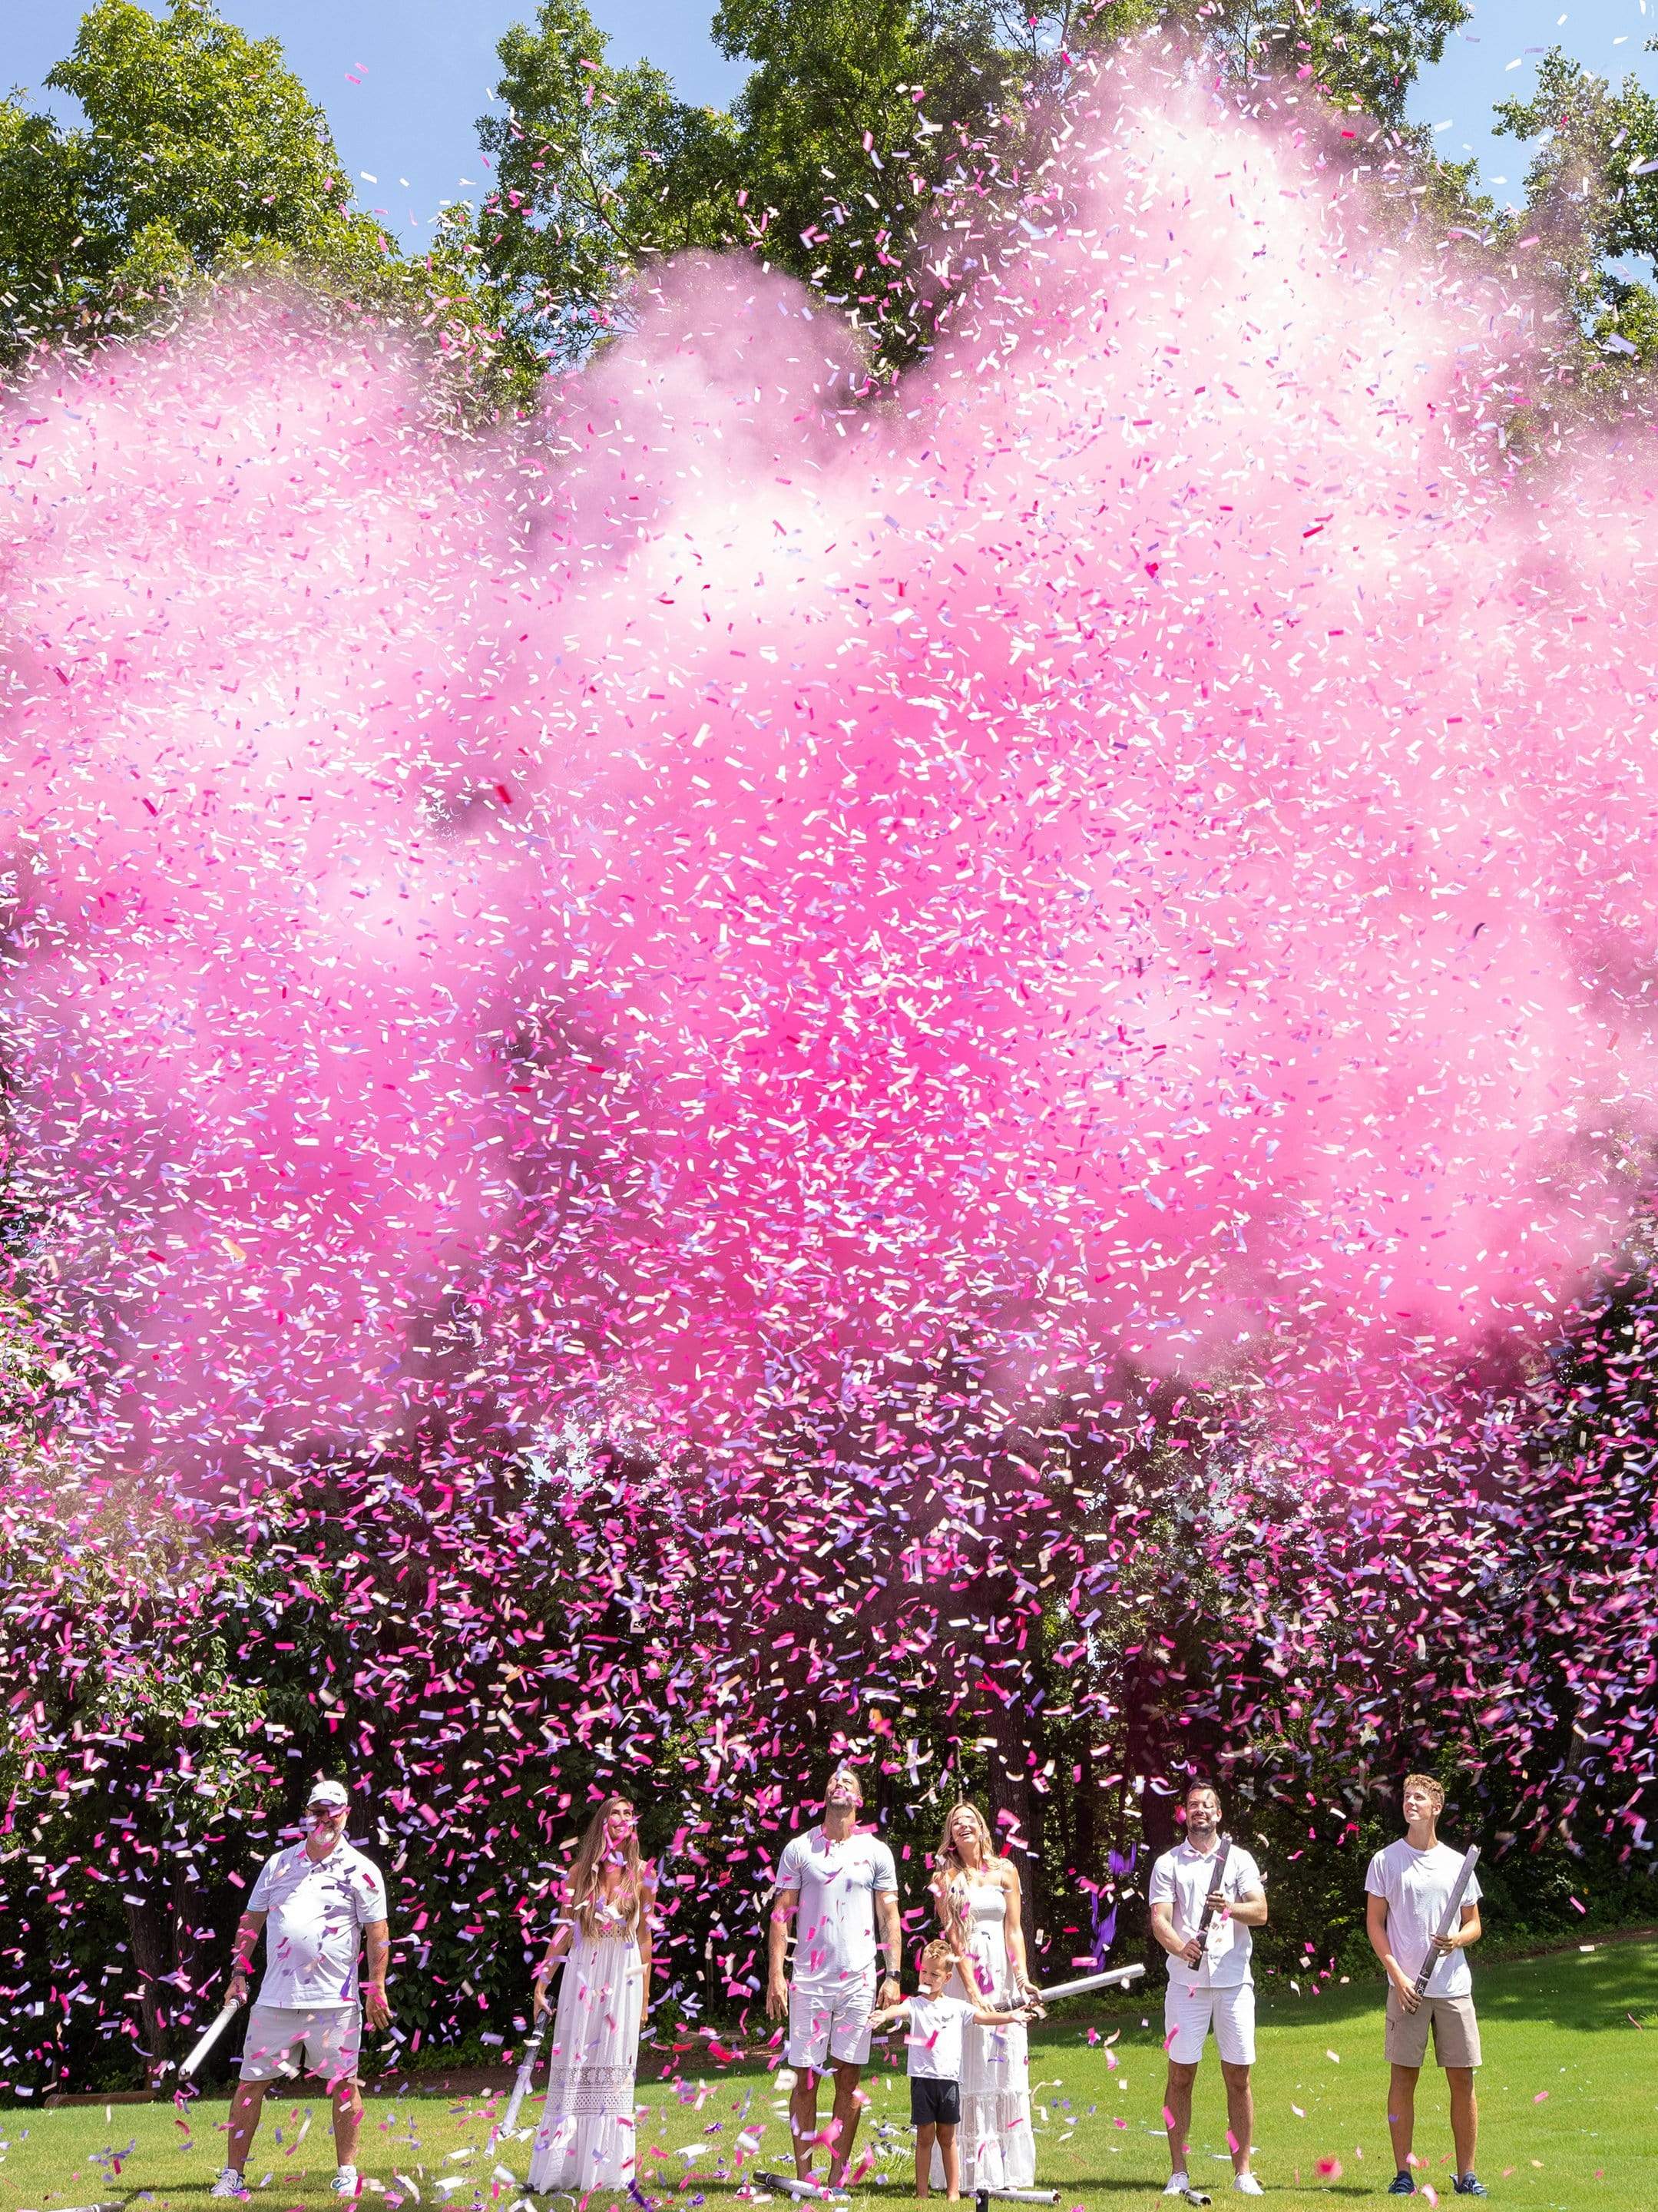 Powder + Confetti Gender Reveal Cannons – POOF THERE IT IS!